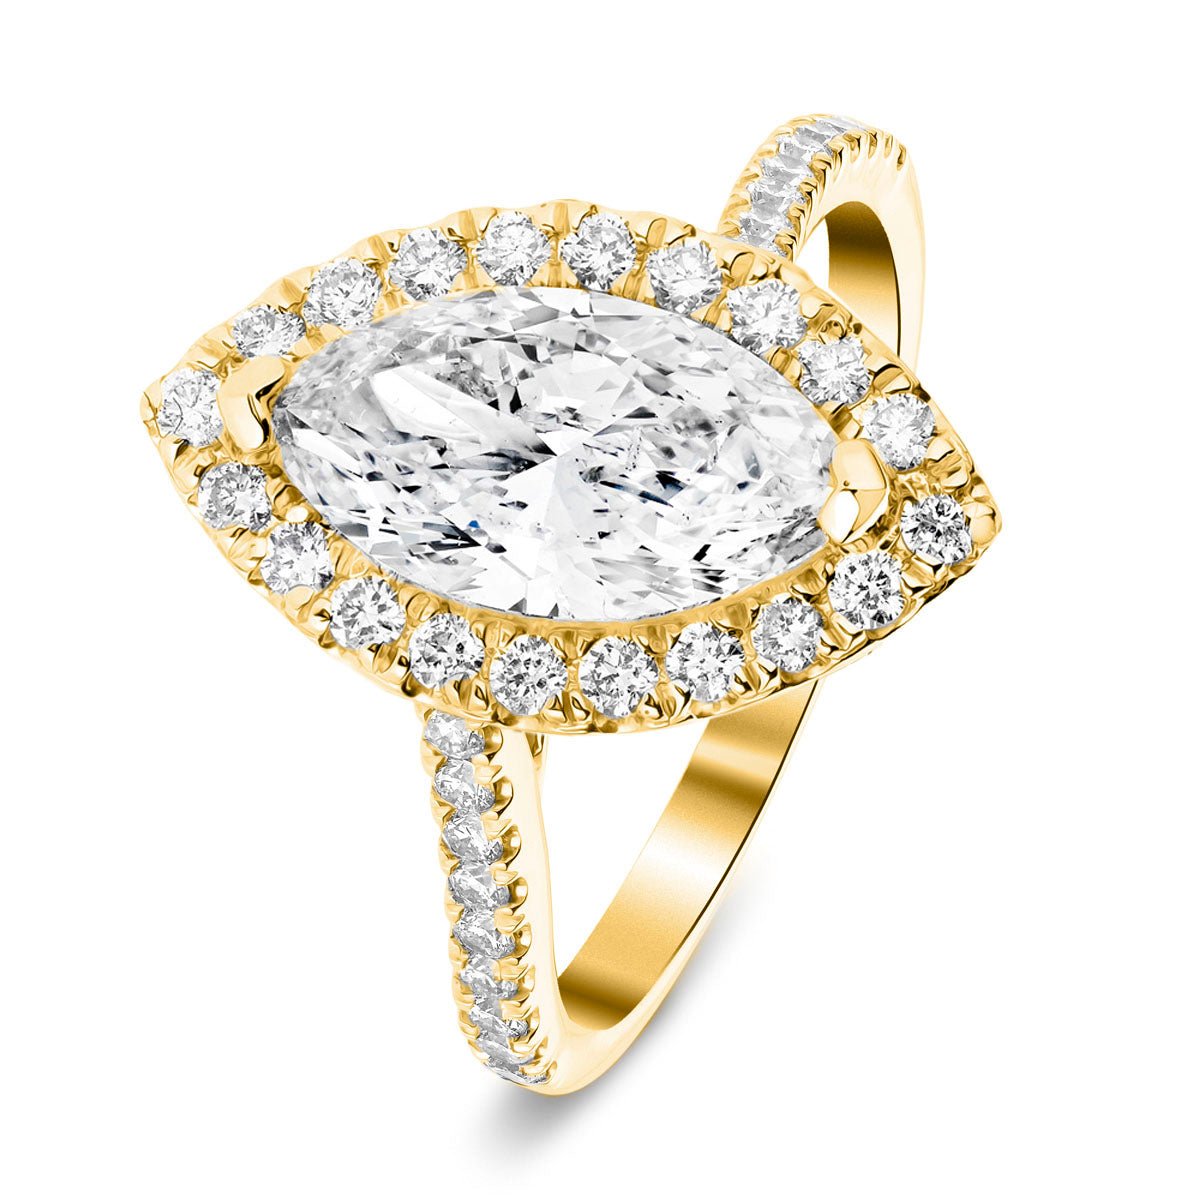 Certified Twist Marquise Diamond Halo Engagement Ring 1.50ct E/VS in 18k Yellow Gold - All Diamond